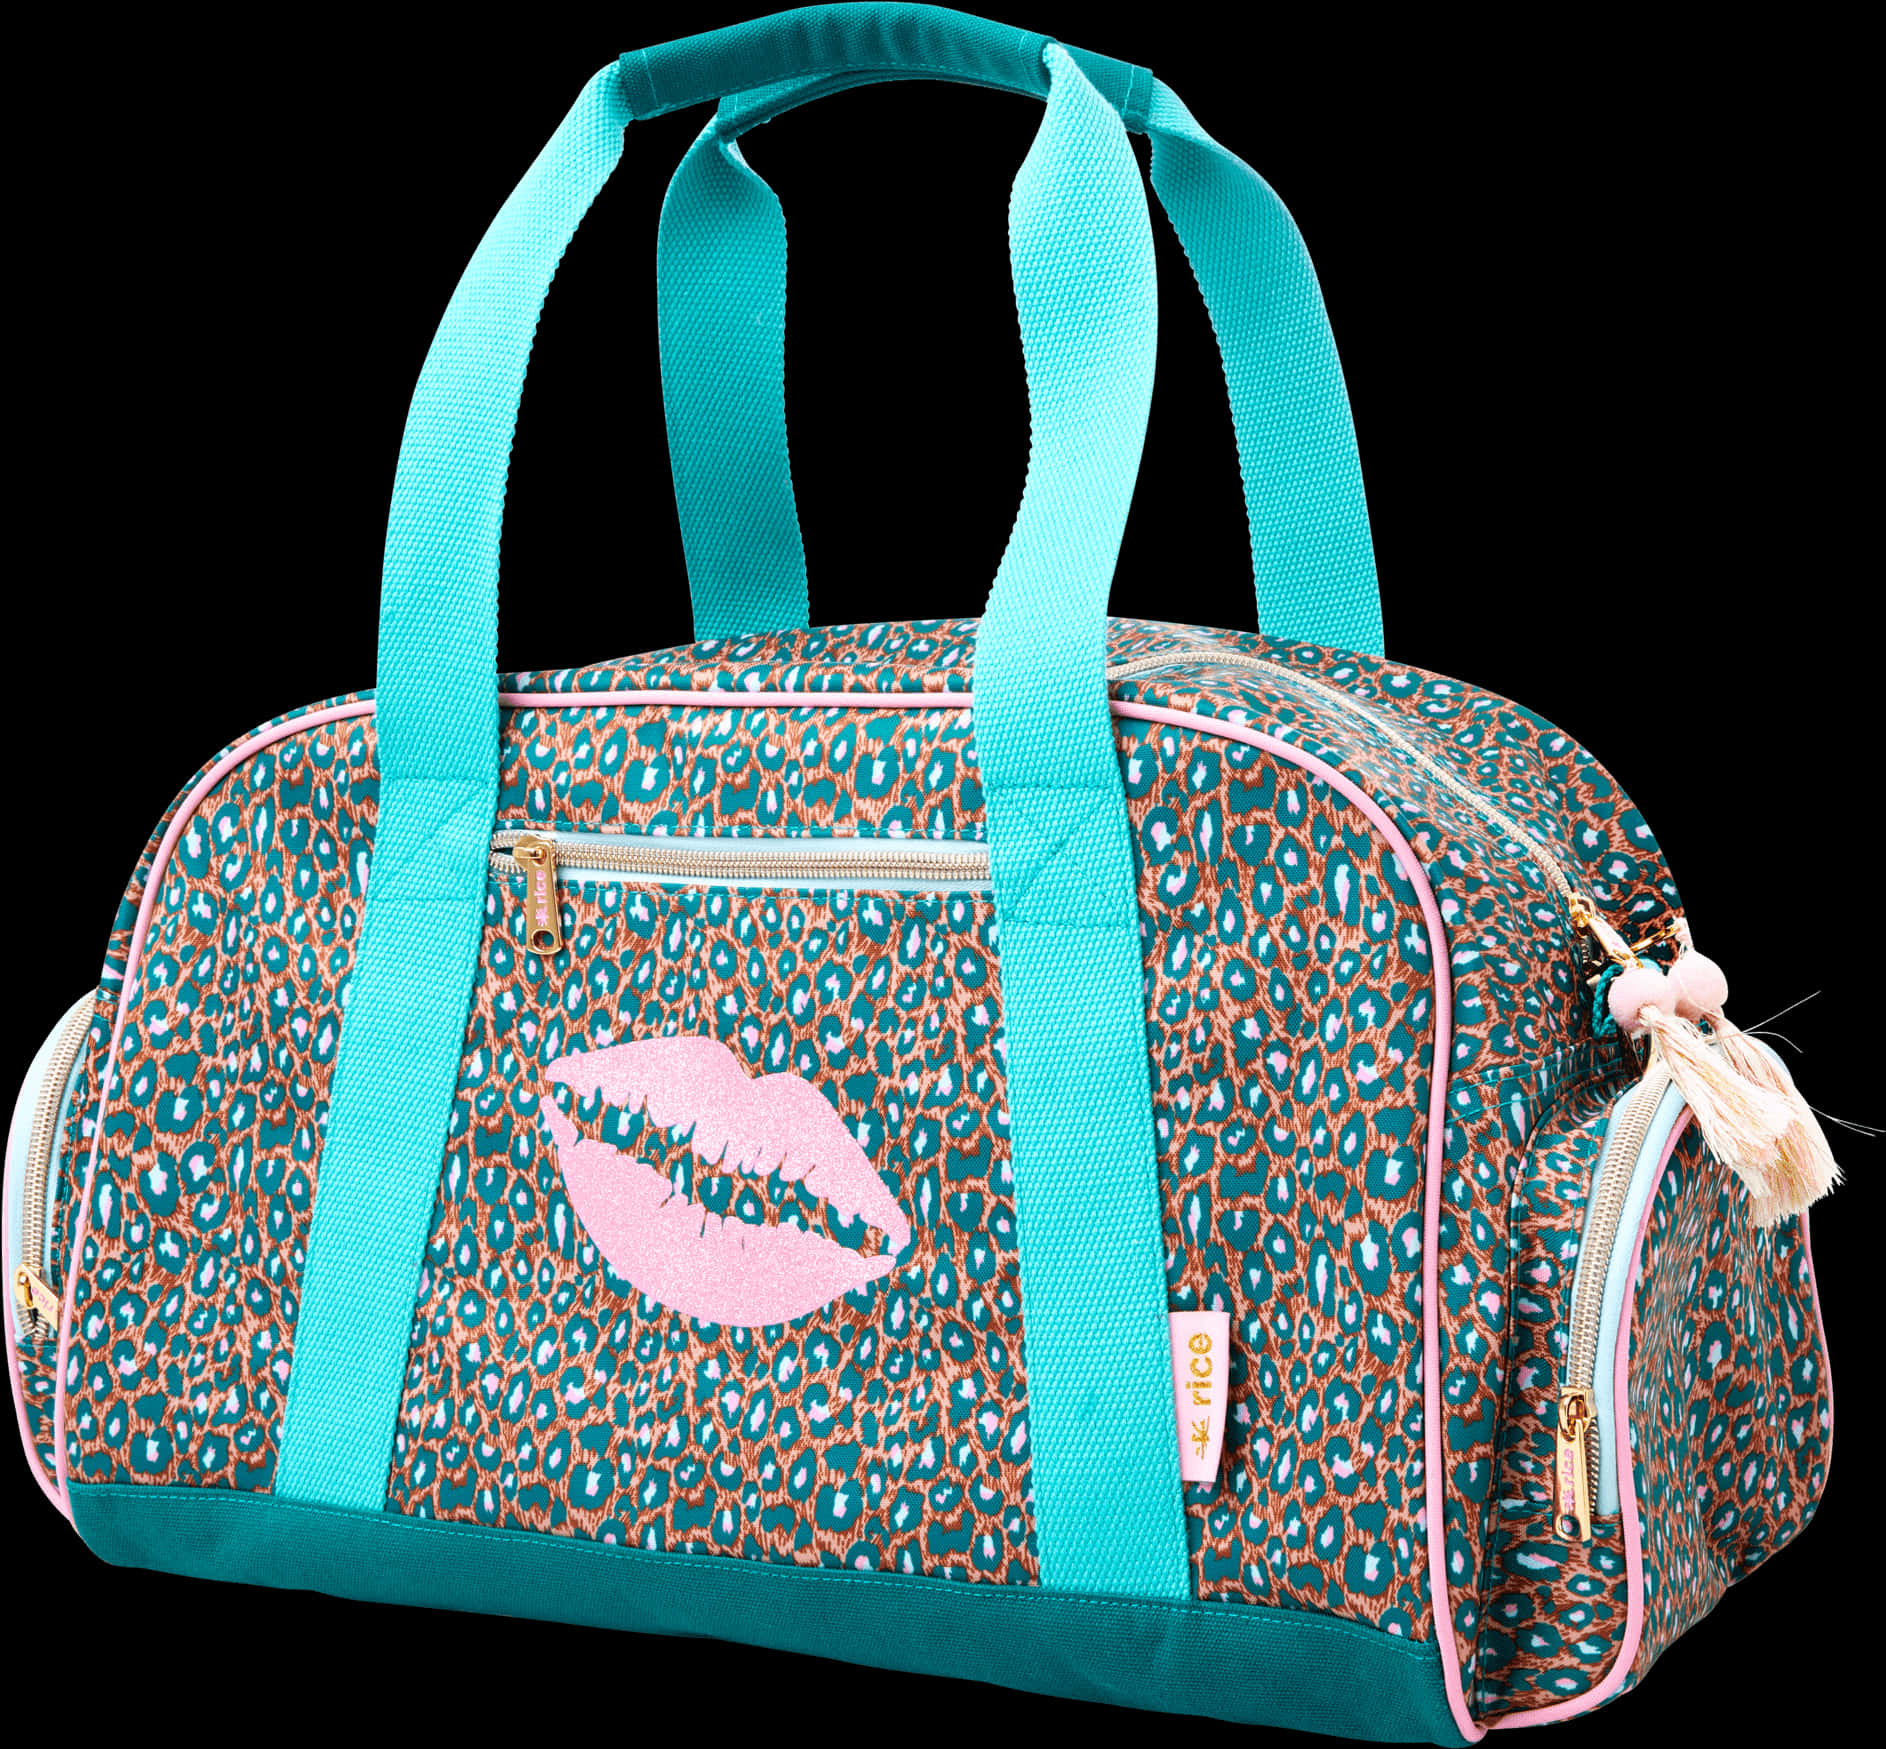 A Bag With A Kiss On It